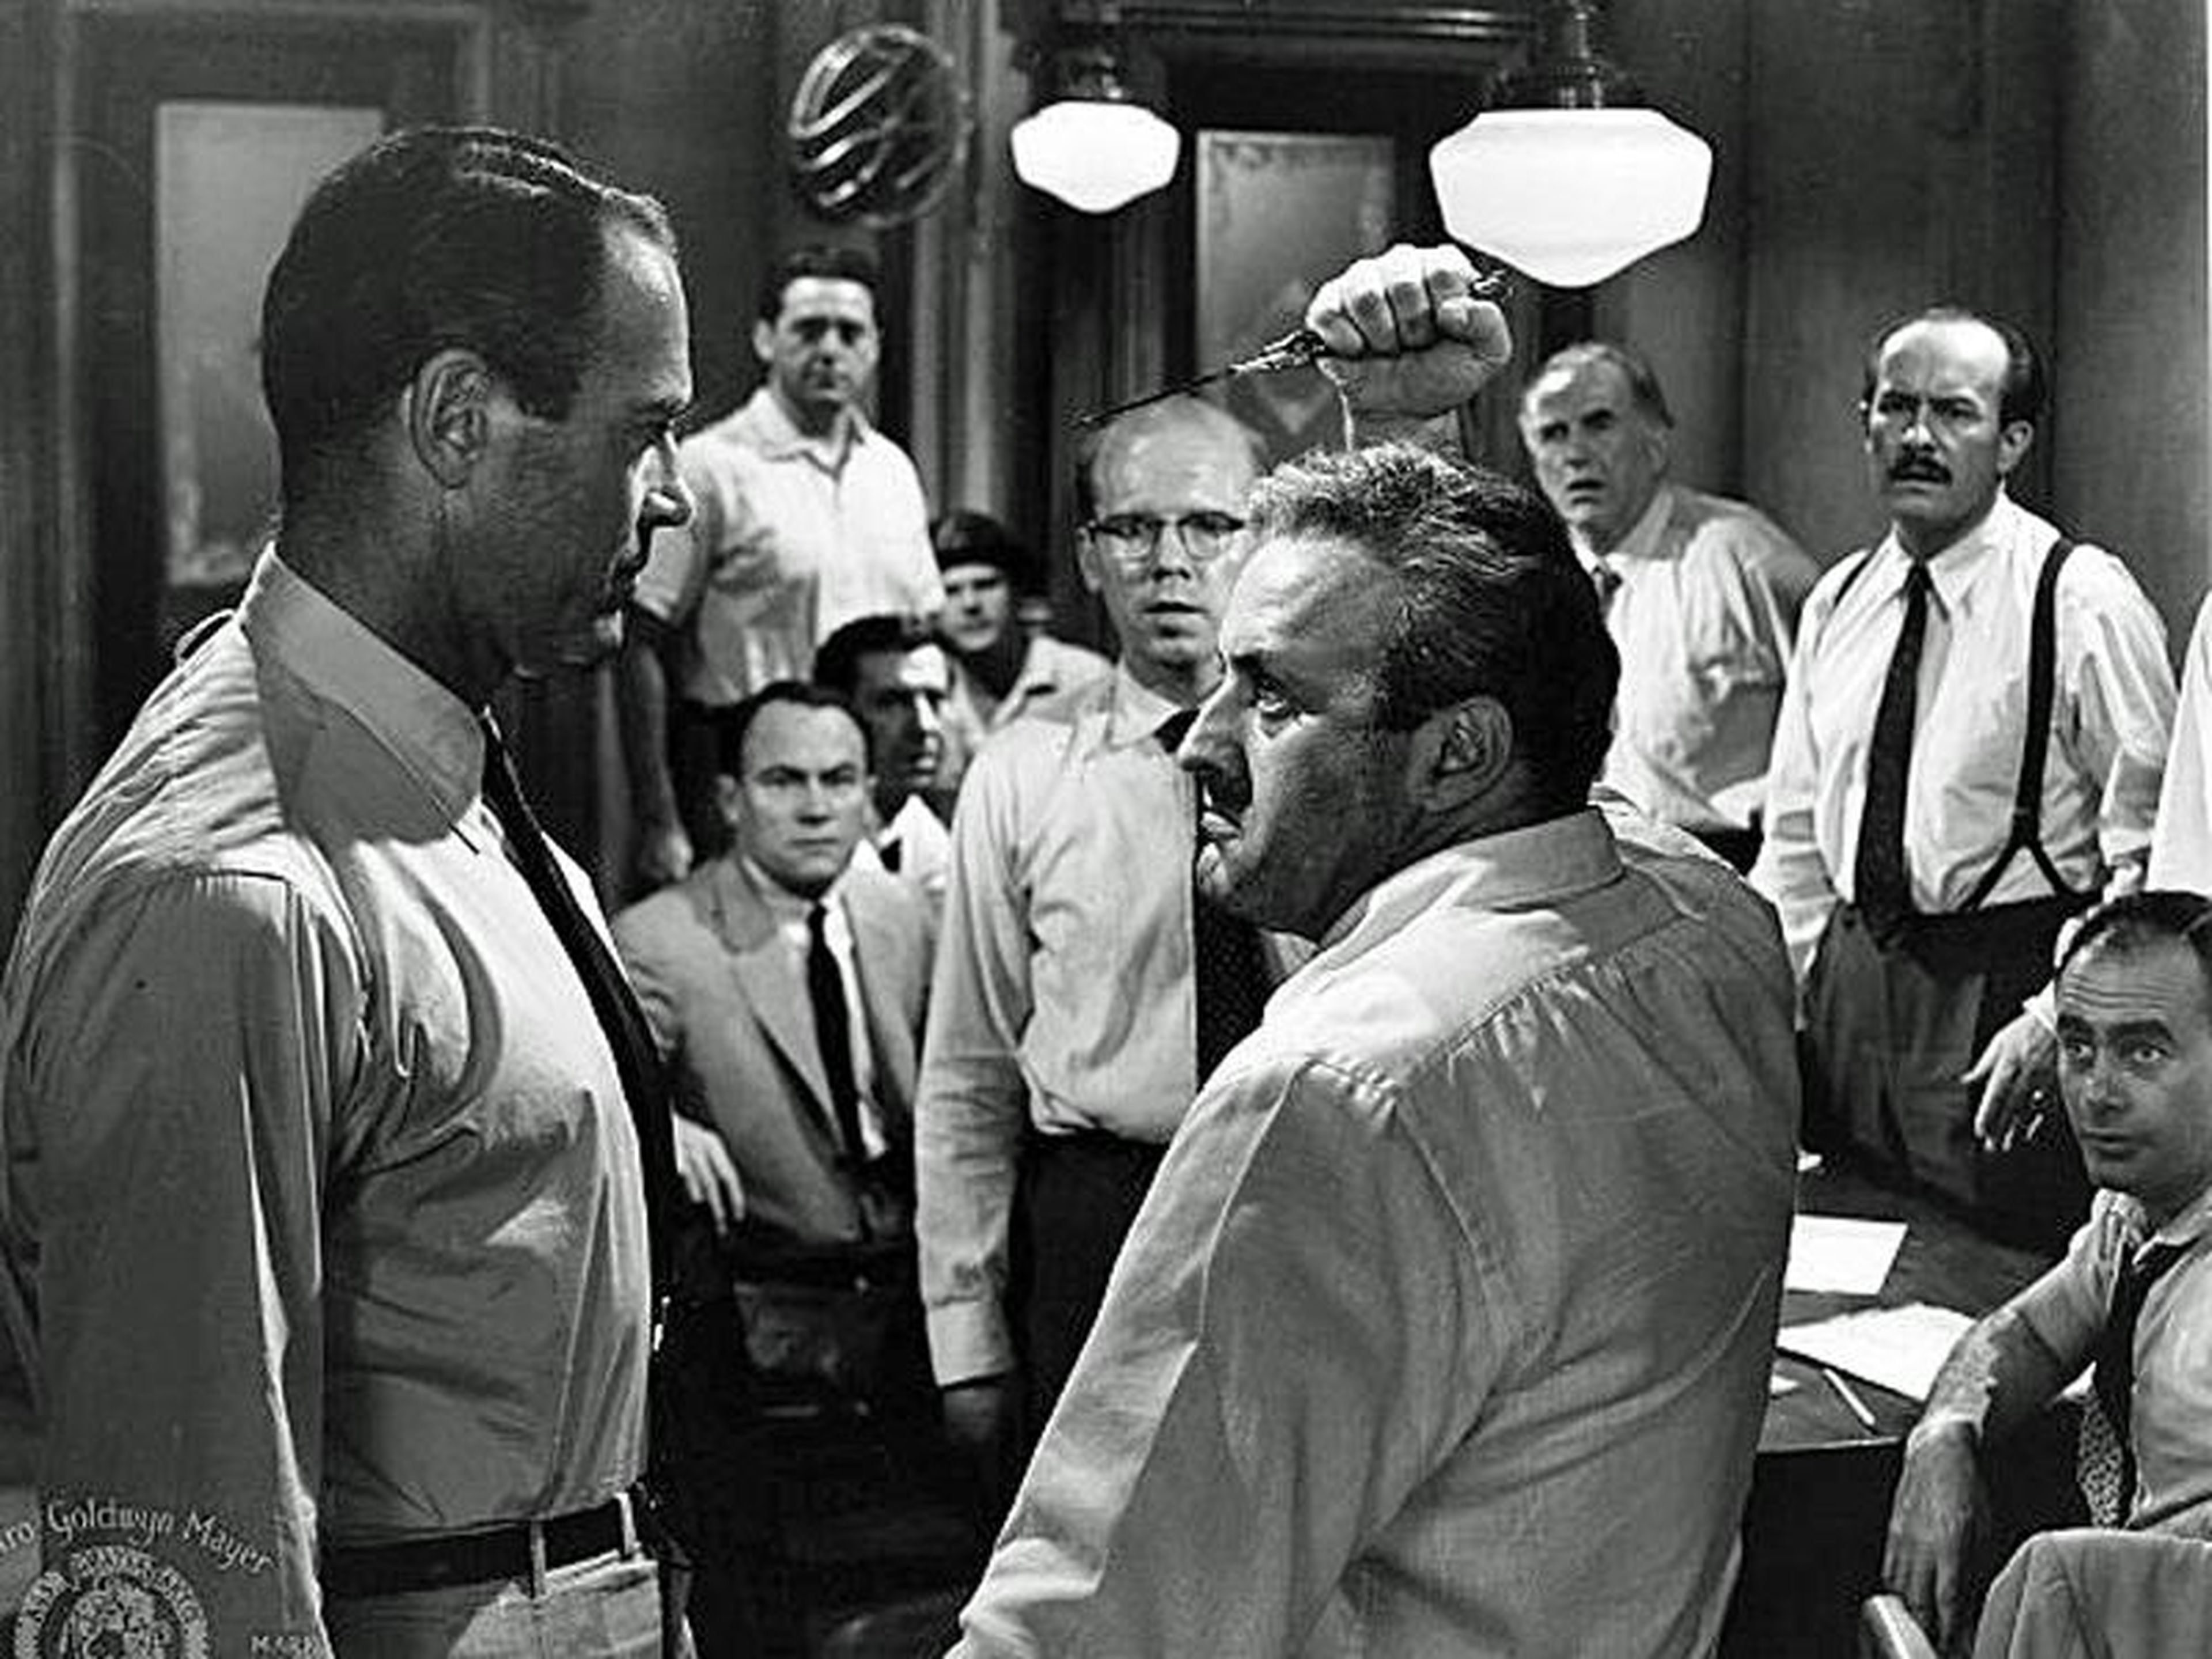 22. "12 Angry Men" (1957)